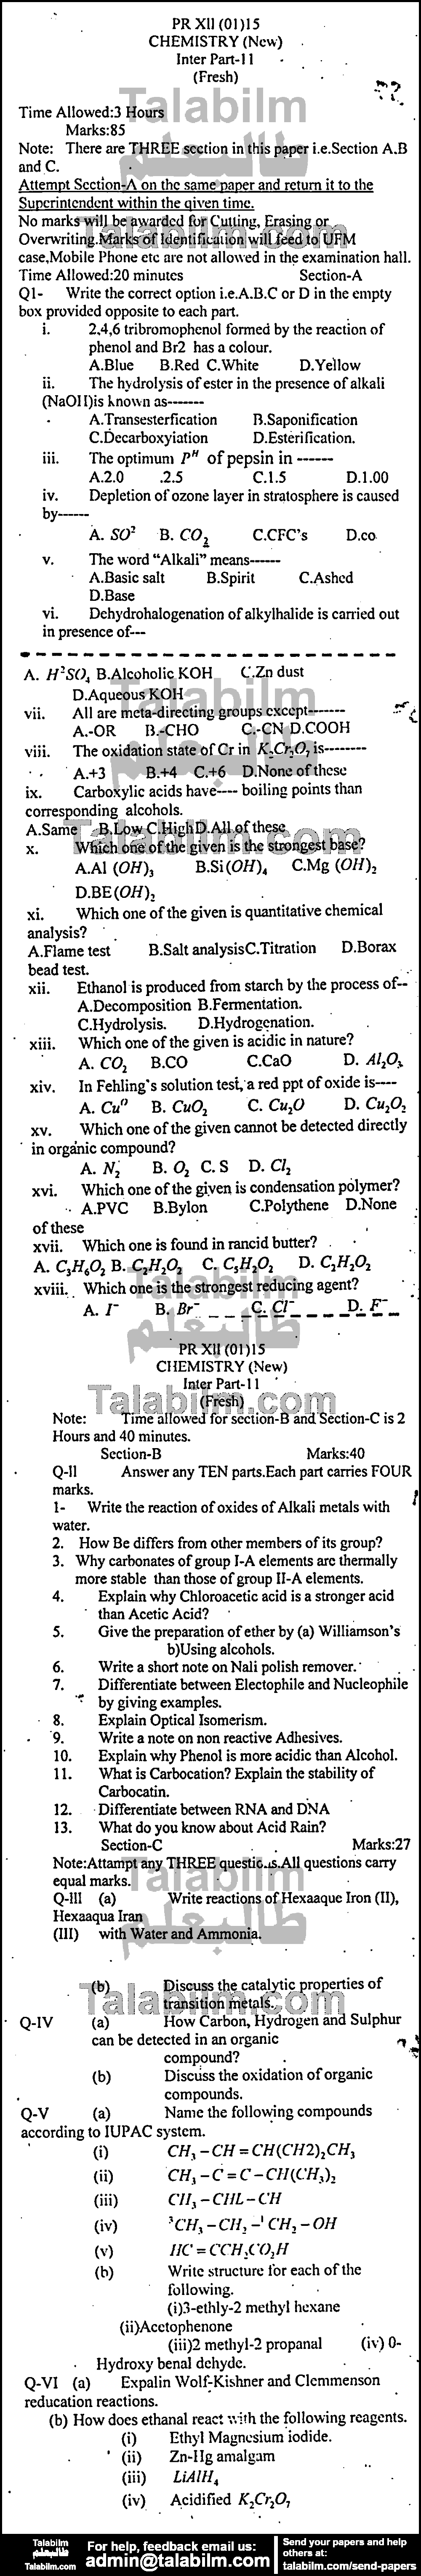 Chemistry 0 past paper for Group-I 2015